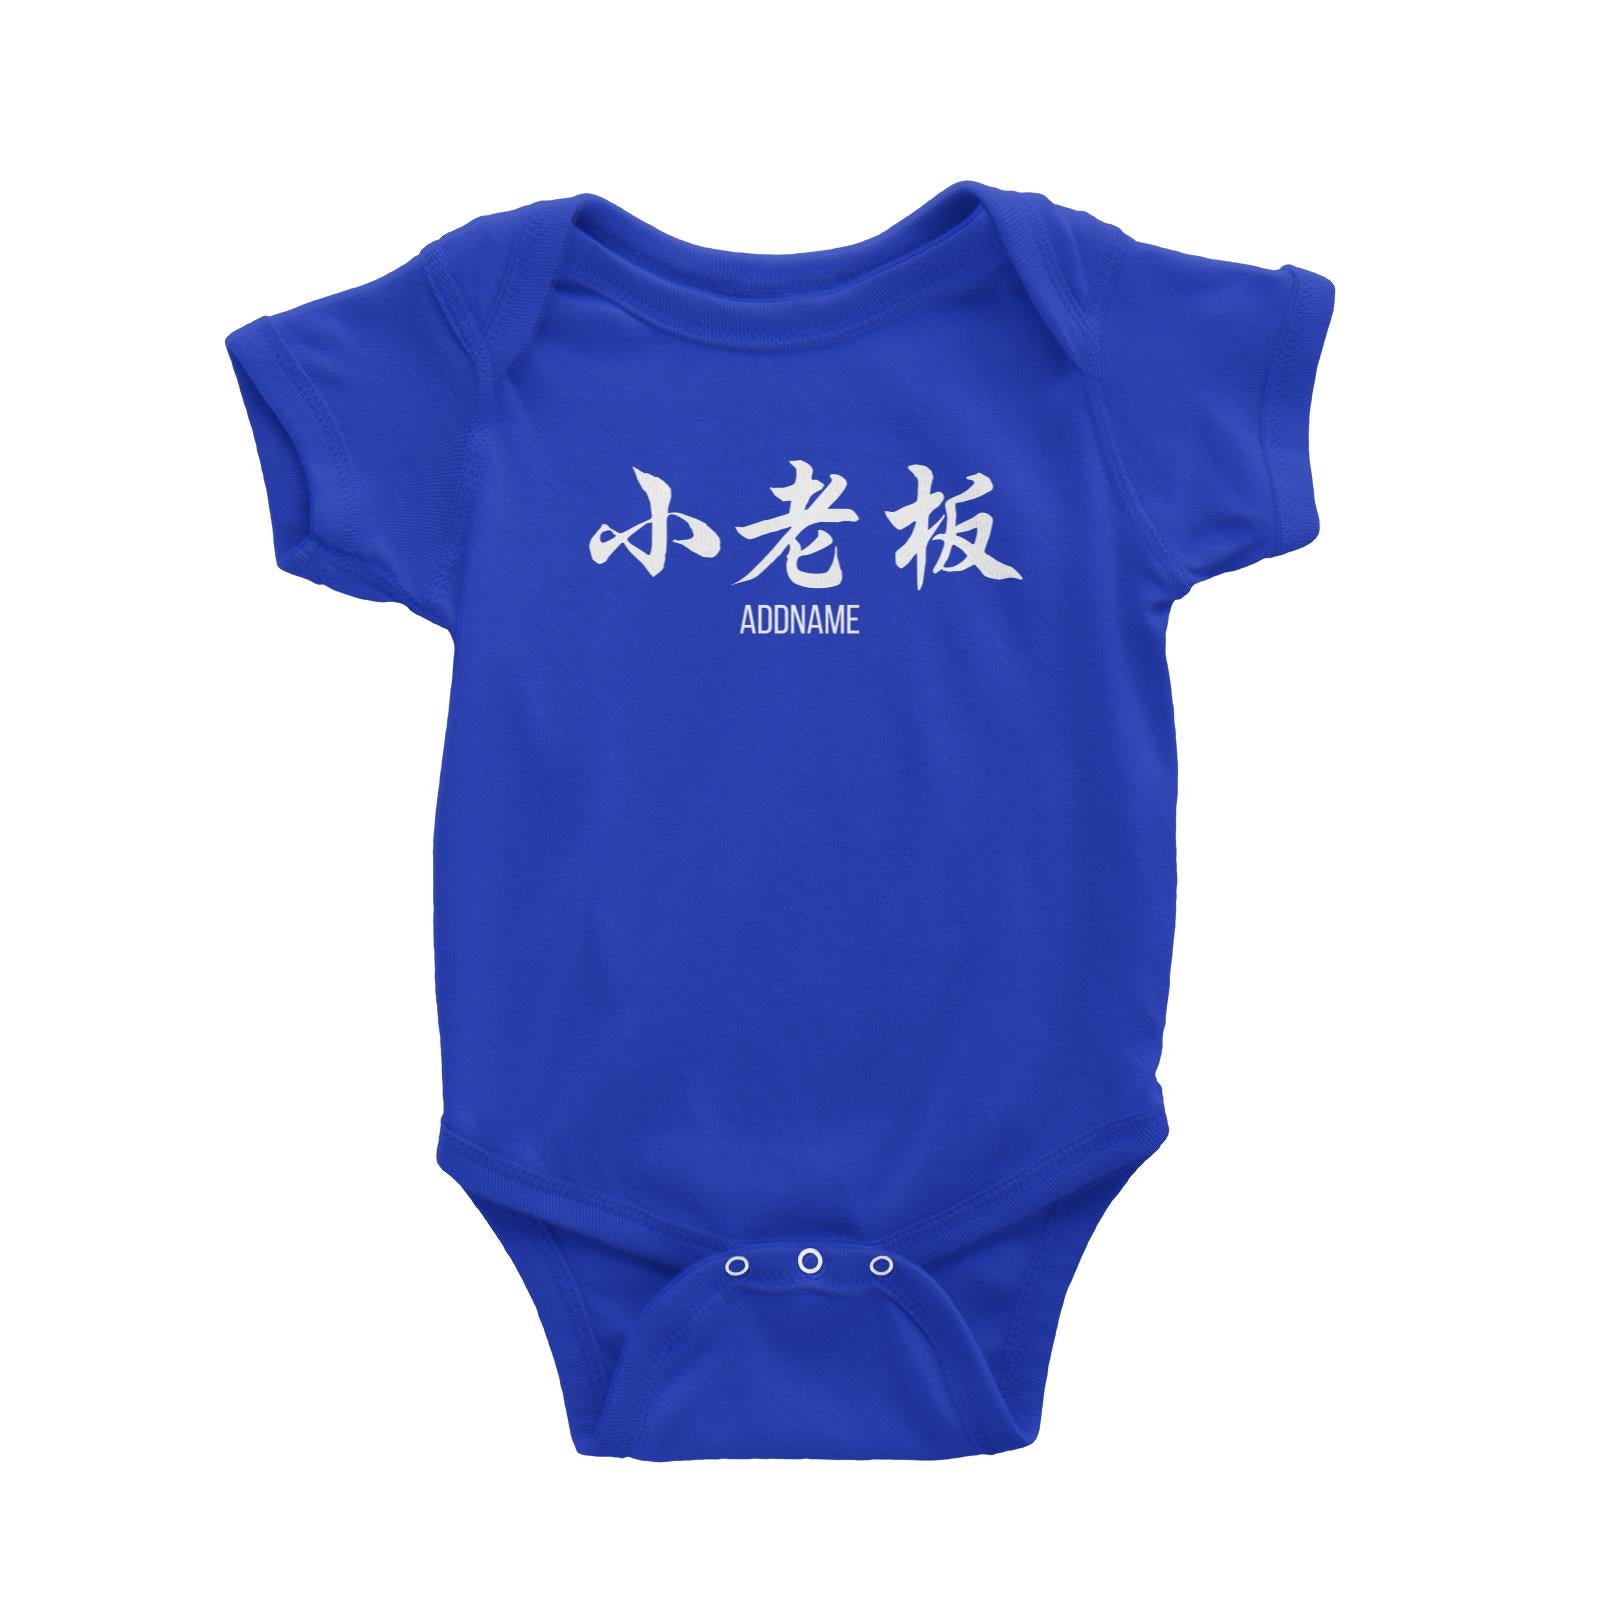 Small Boss in Chinese Calligraphy Baby Romper